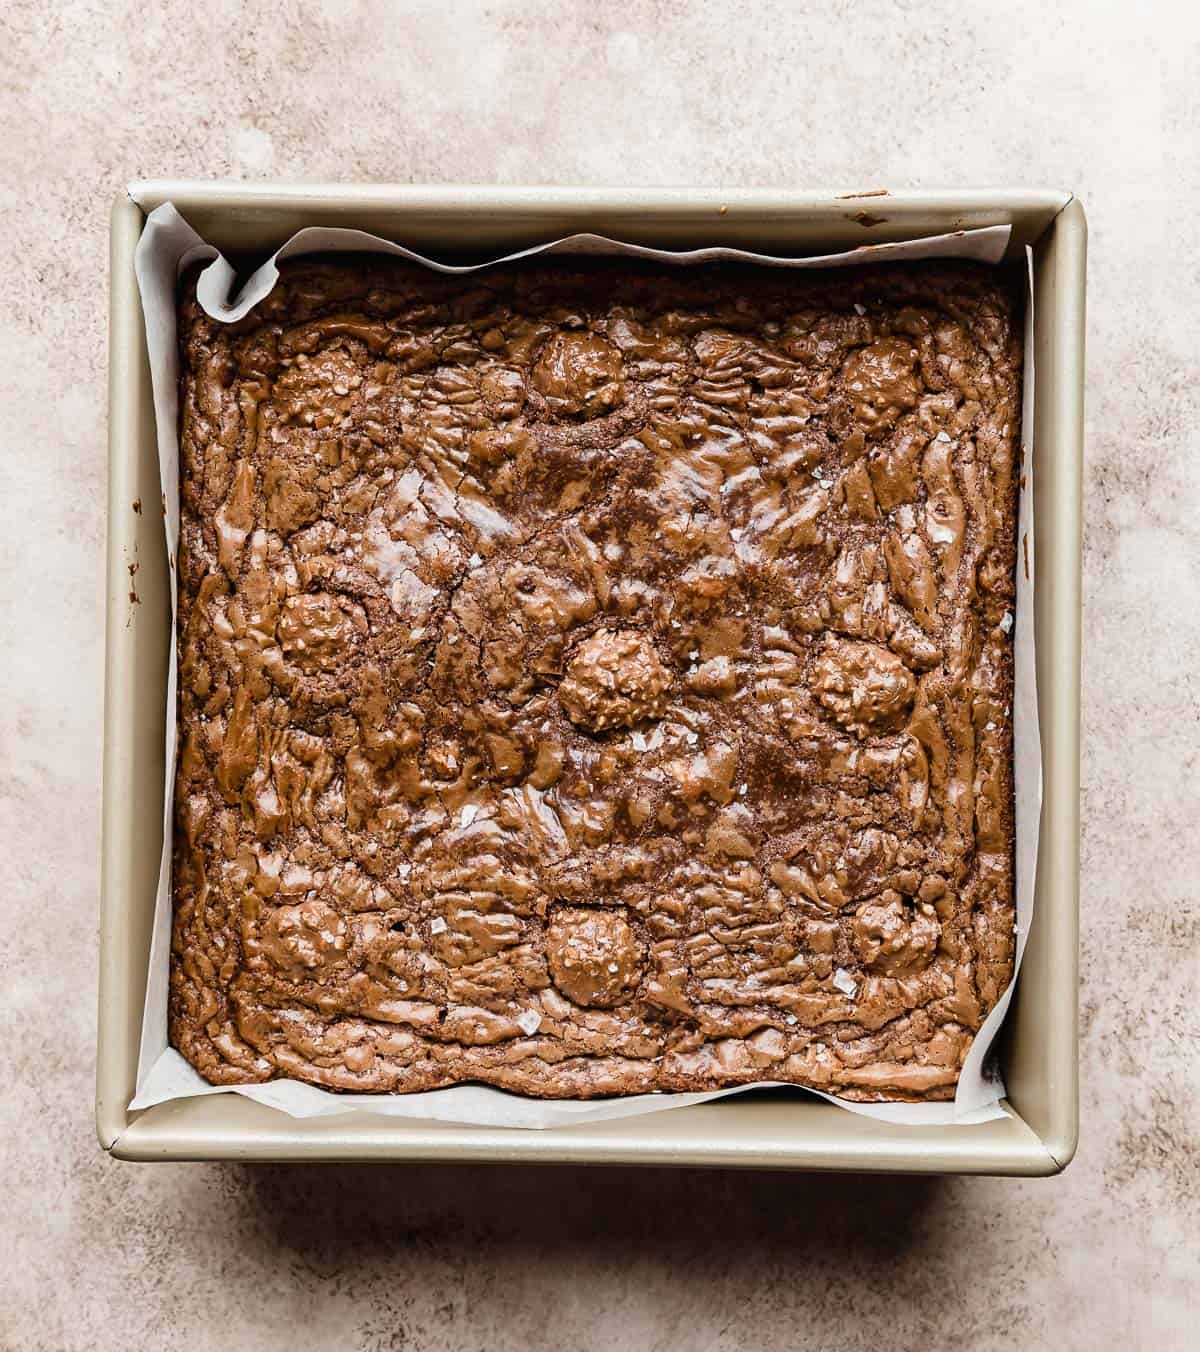 Ferrero Rocher Brownies with a crackly baked top, on a beige textured background.